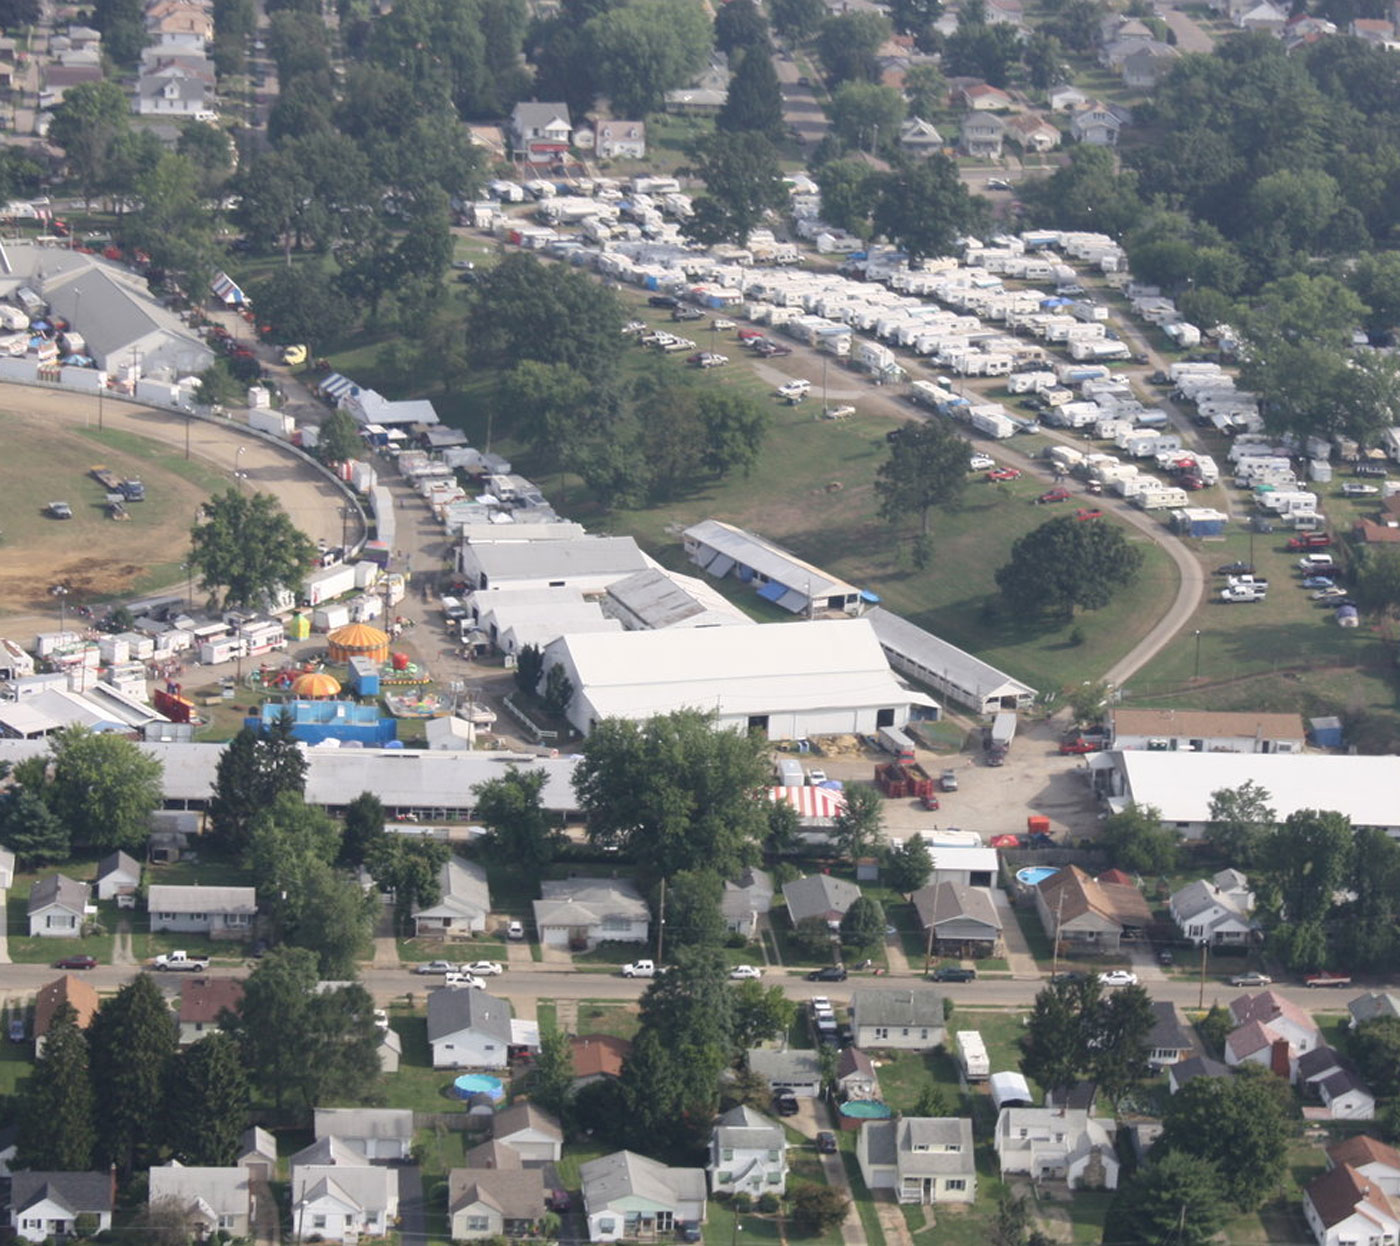 Fair Week Camping At The Muskingum County Fairgrounds